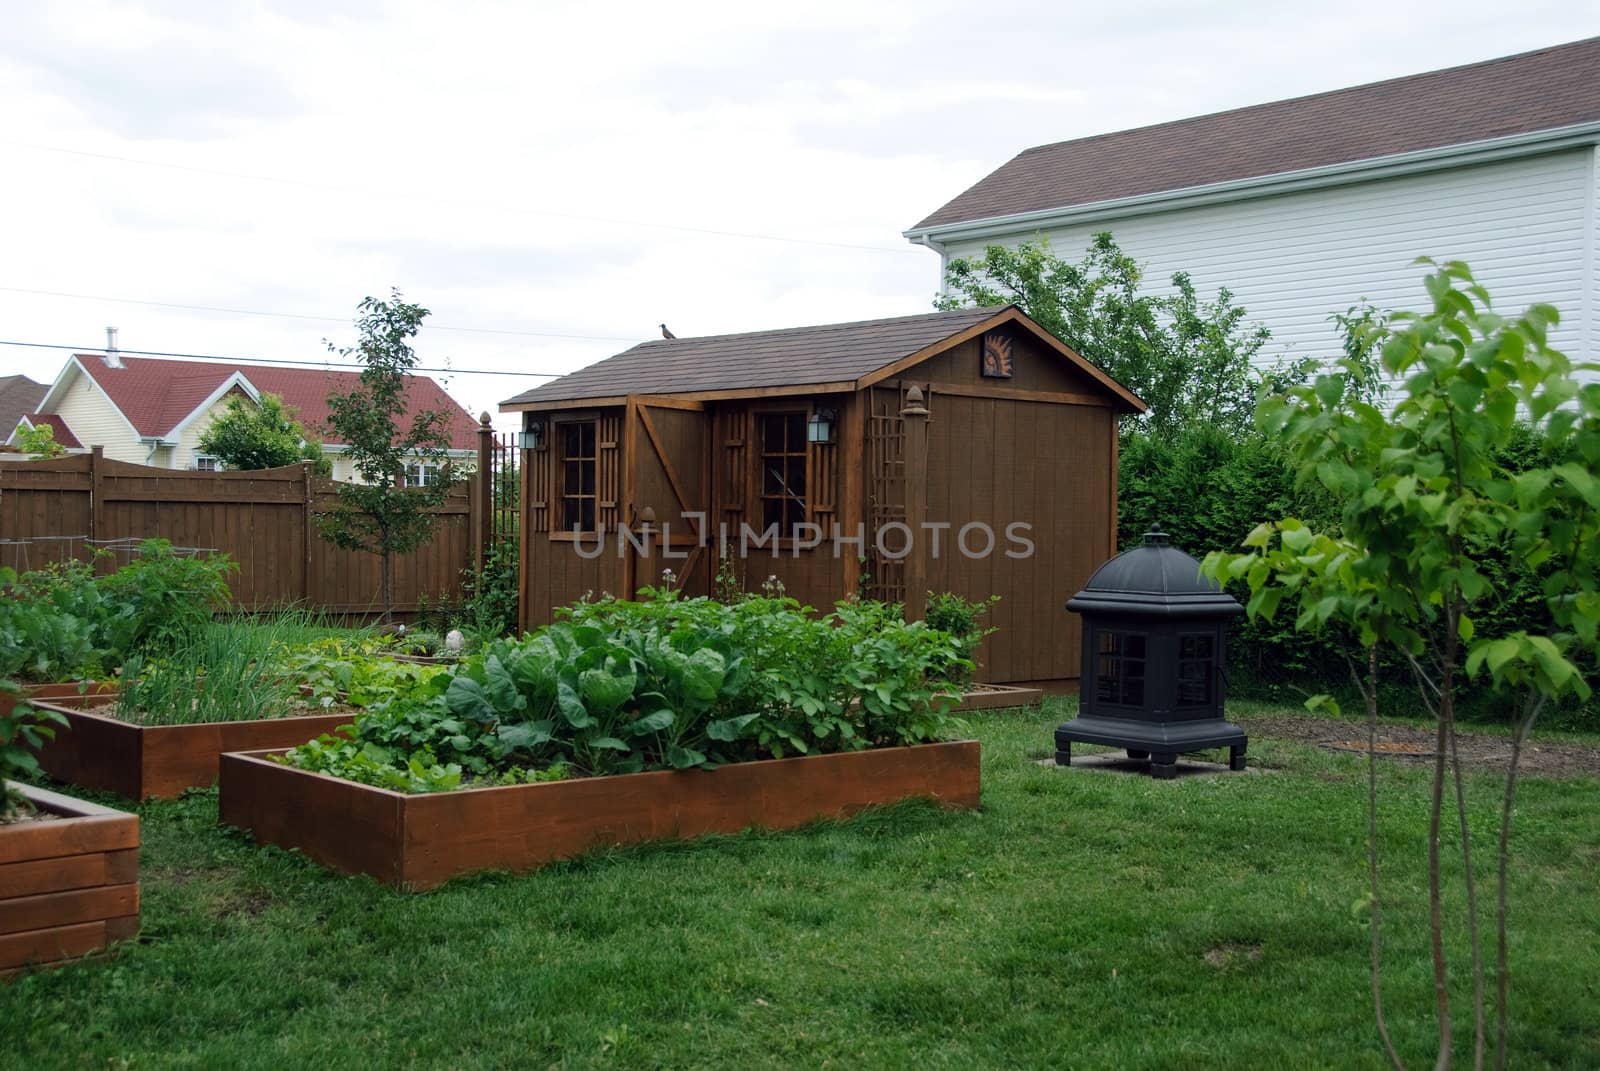 A Square foot gardening set-up in a typical back yard